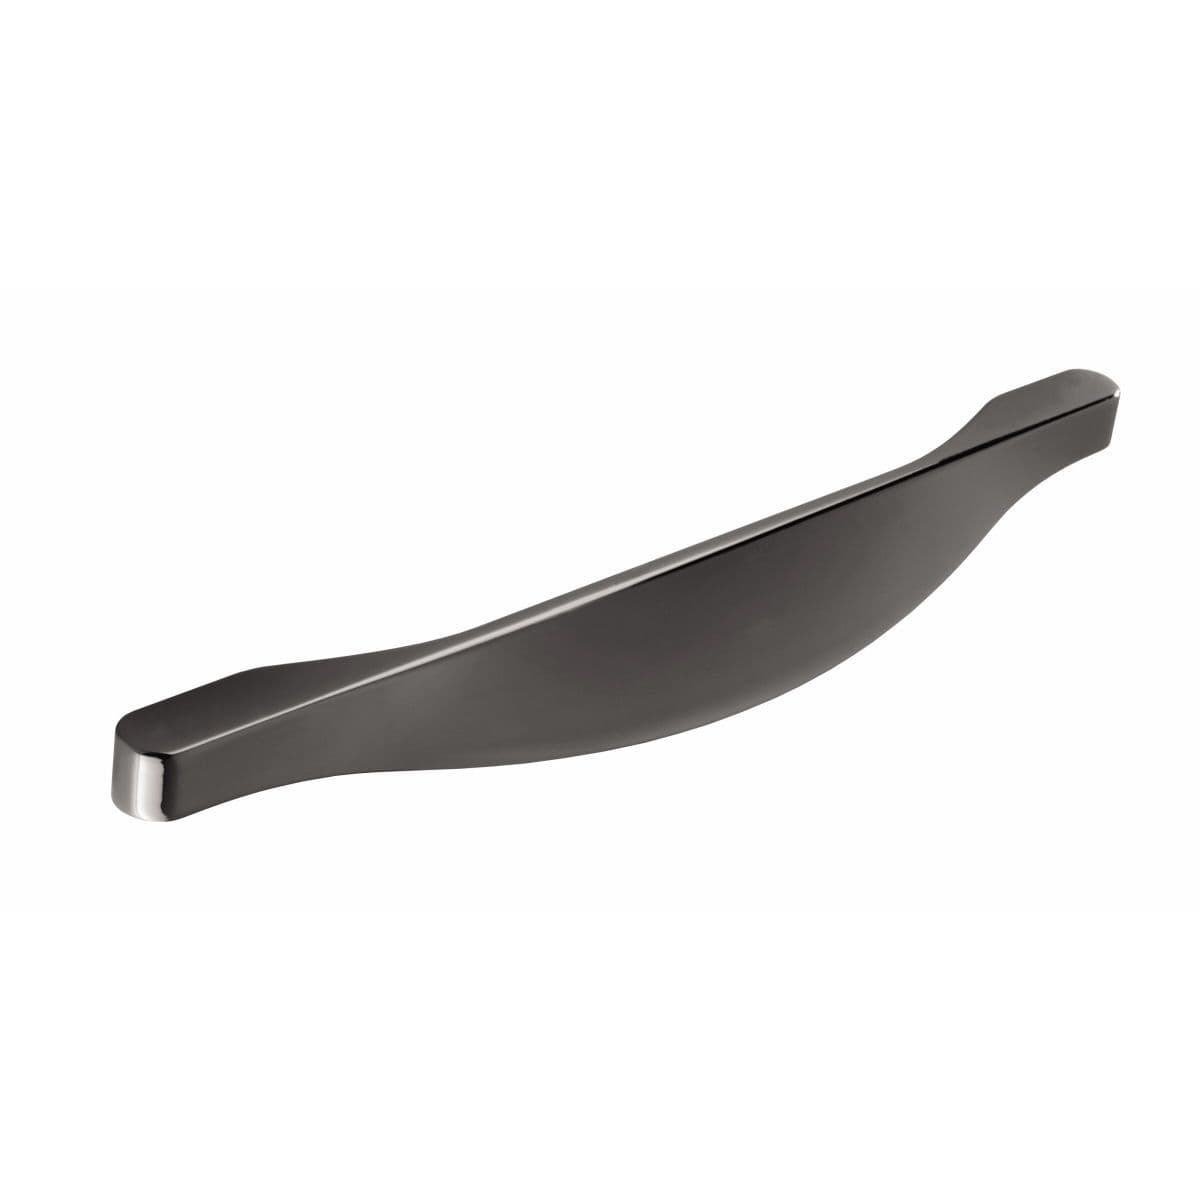 CAVE PULL Cupboard Handle - 160mm h/c size - BLACK CHROME finish (PWS H1083.160)